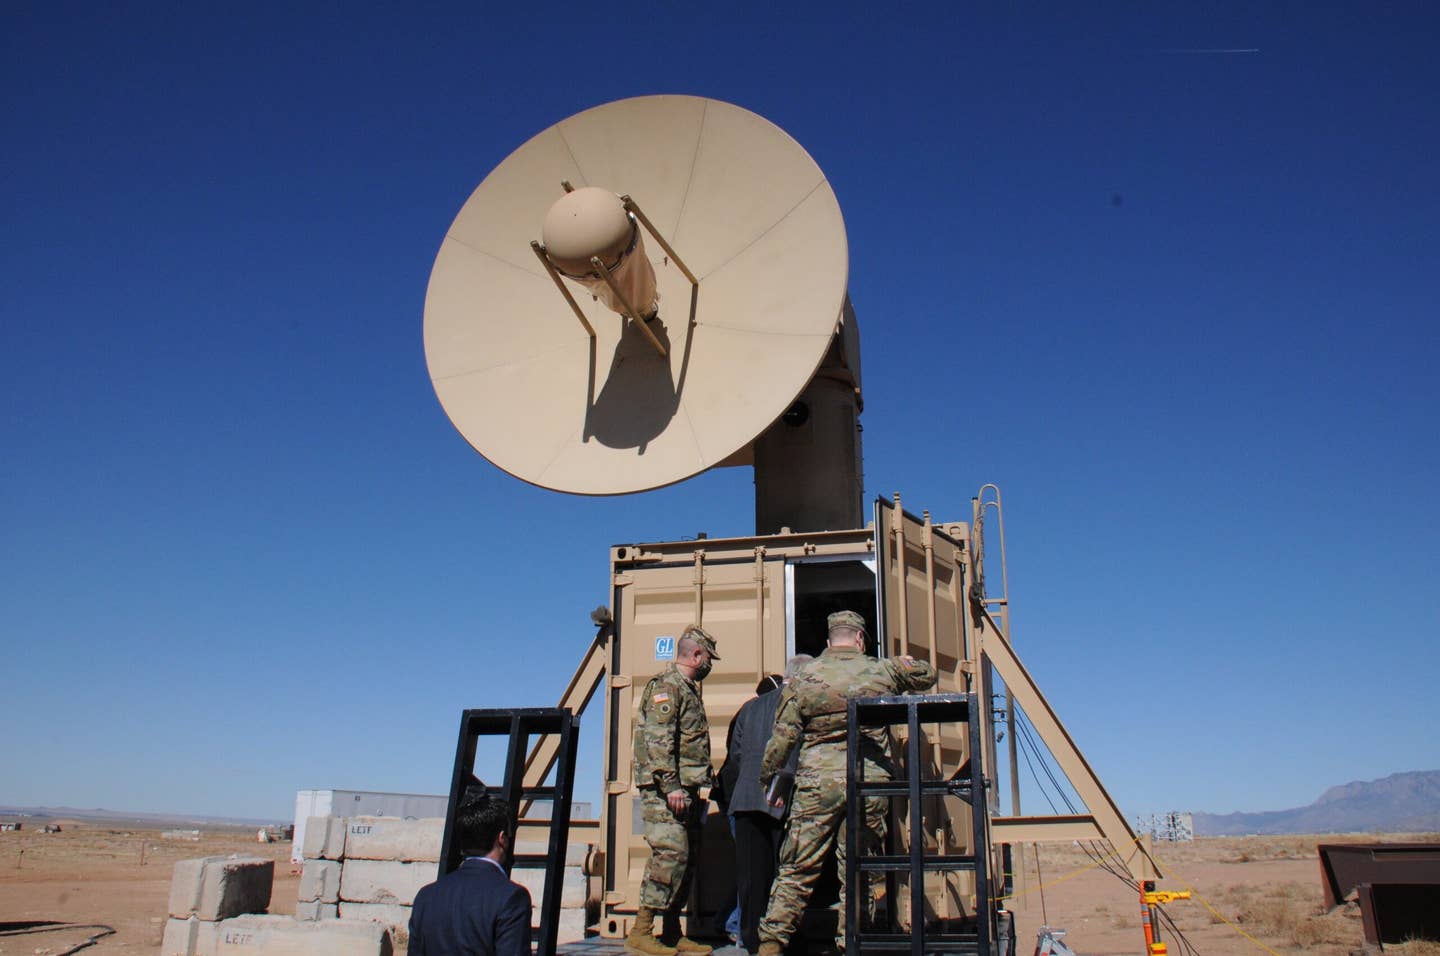 Leaders from the Army Rapid Capabilities and Critical Technologies Office enter the portable control center of Air Force Research Laboratory’s Tactical High Power Operational Responder, or THOR, to view the system’s drone-killing capabilities, February 11, 2021, at Kirtland Air Force Base, New Mexico. <em>U.S. Air Force photo by John Cochran</em><br>